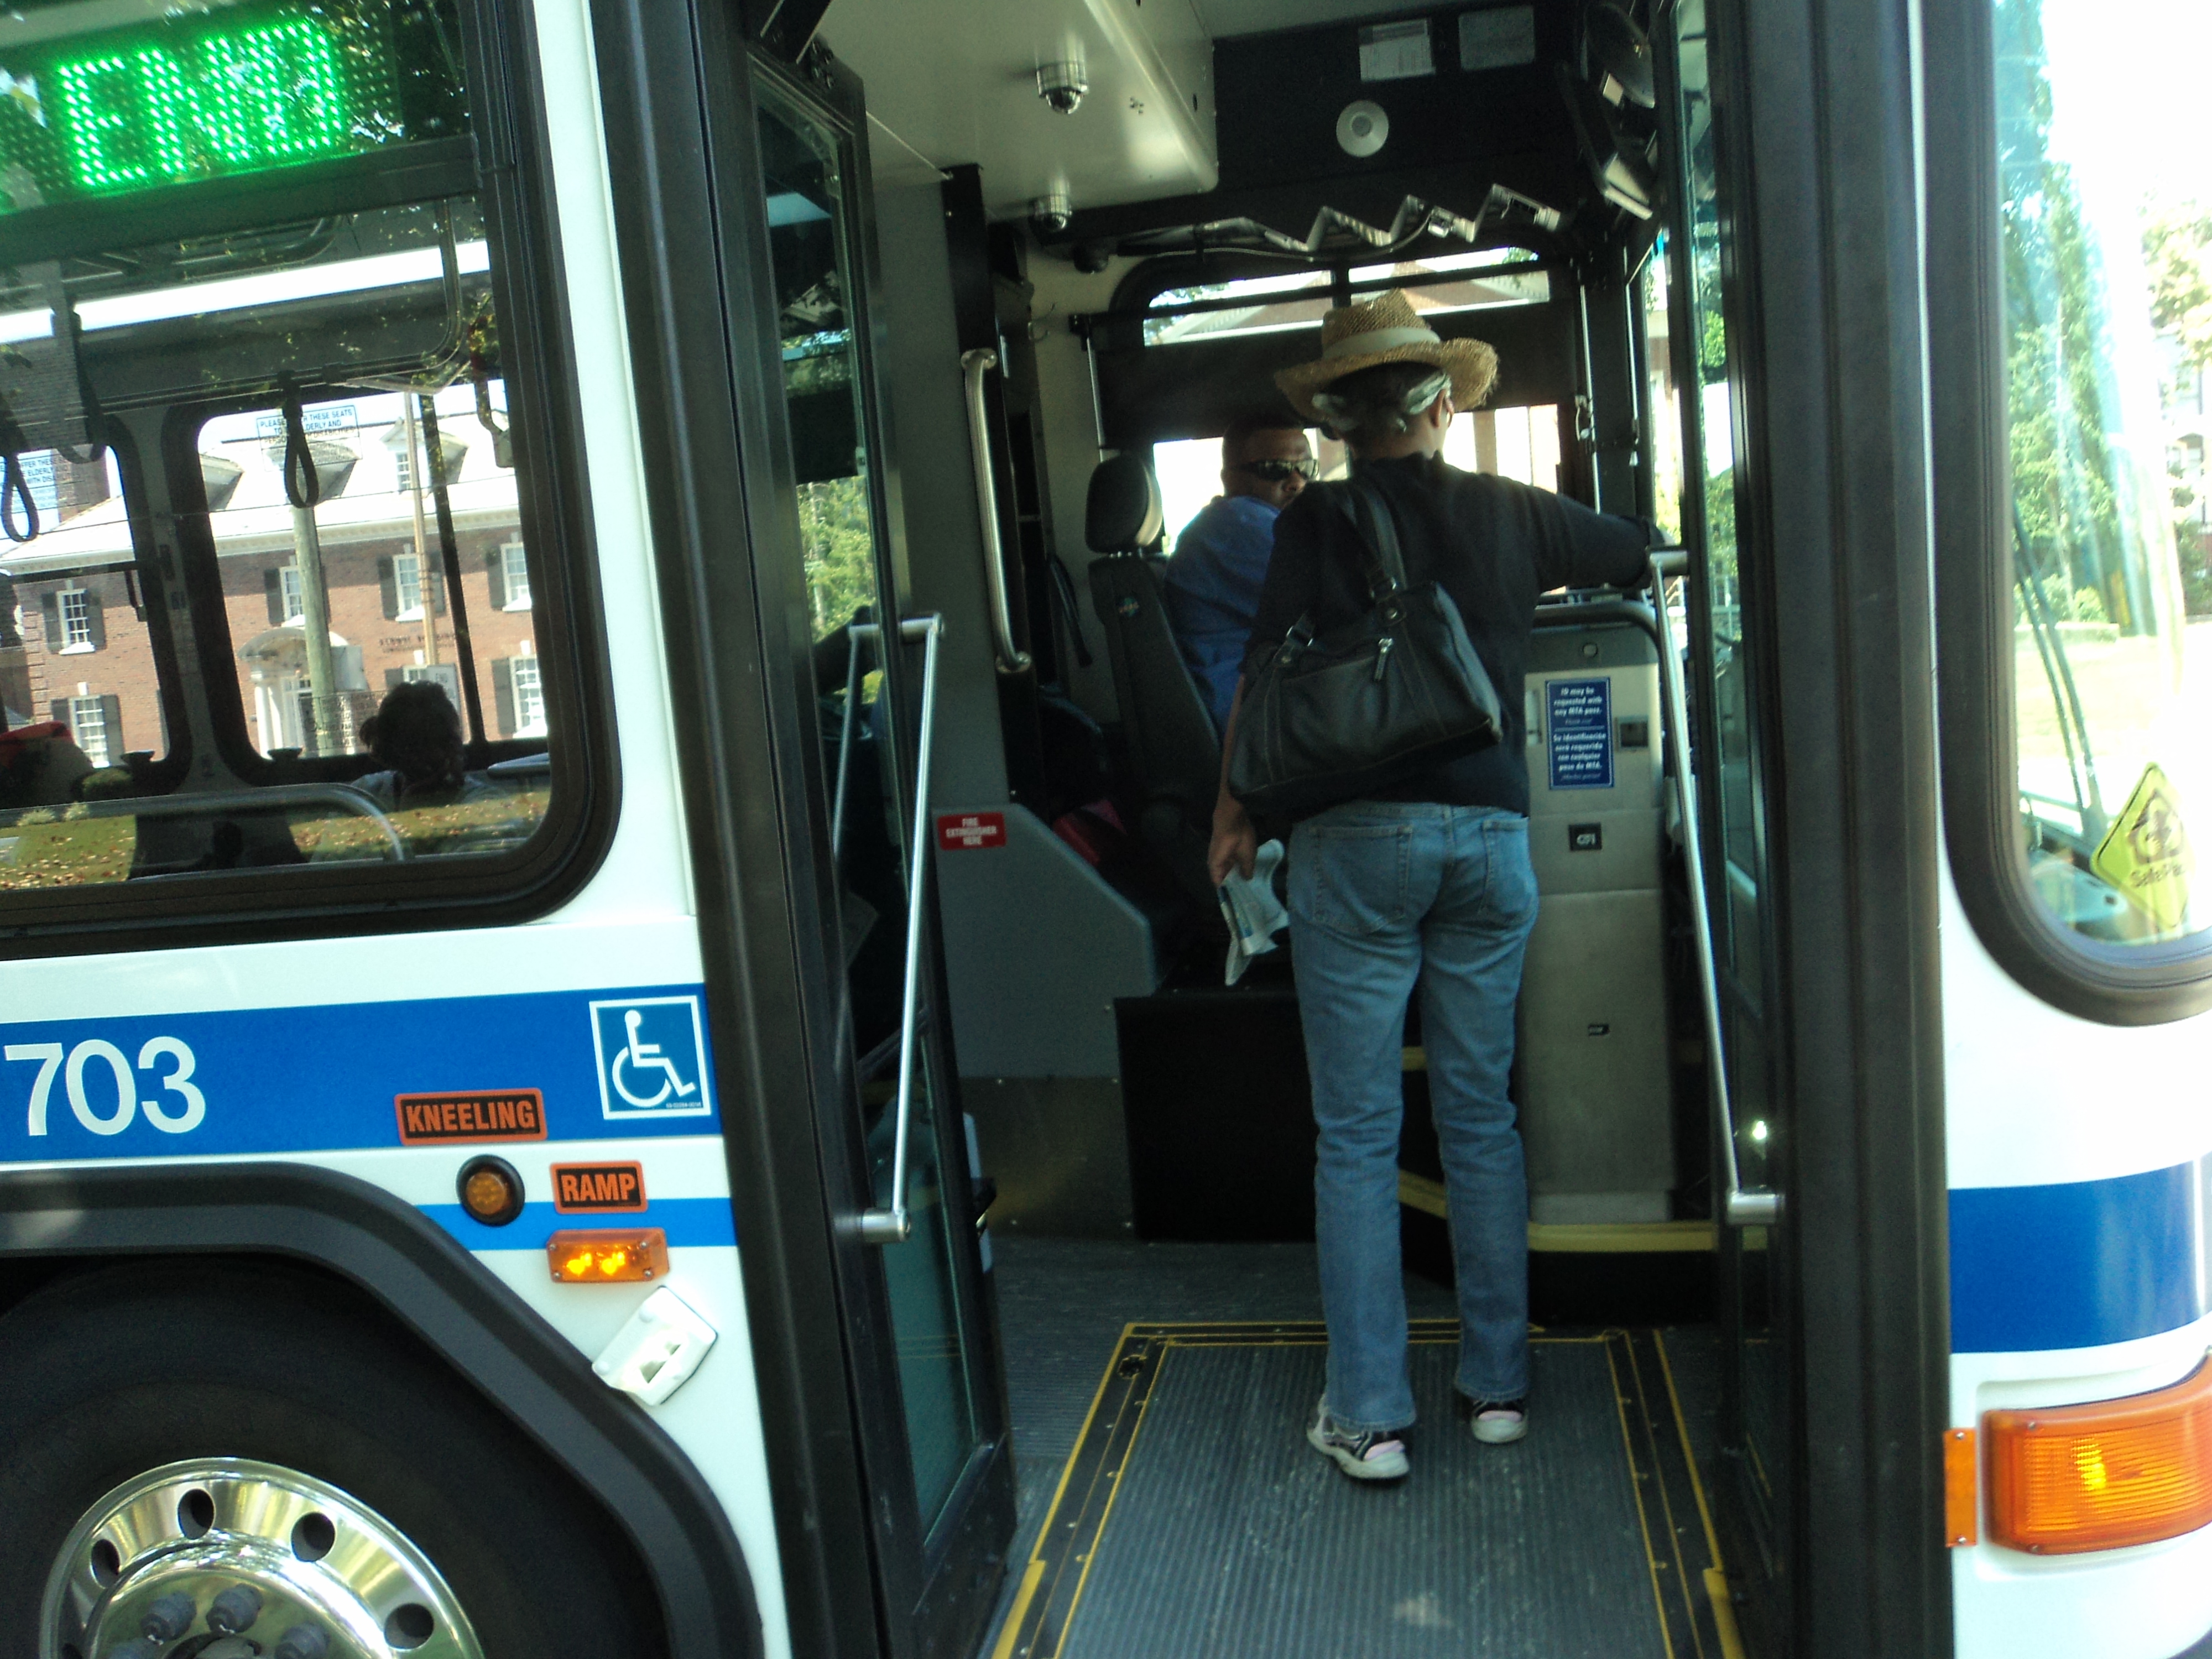 Free New Year’s Bus Rides in Metro Courtesy of Miller Lite